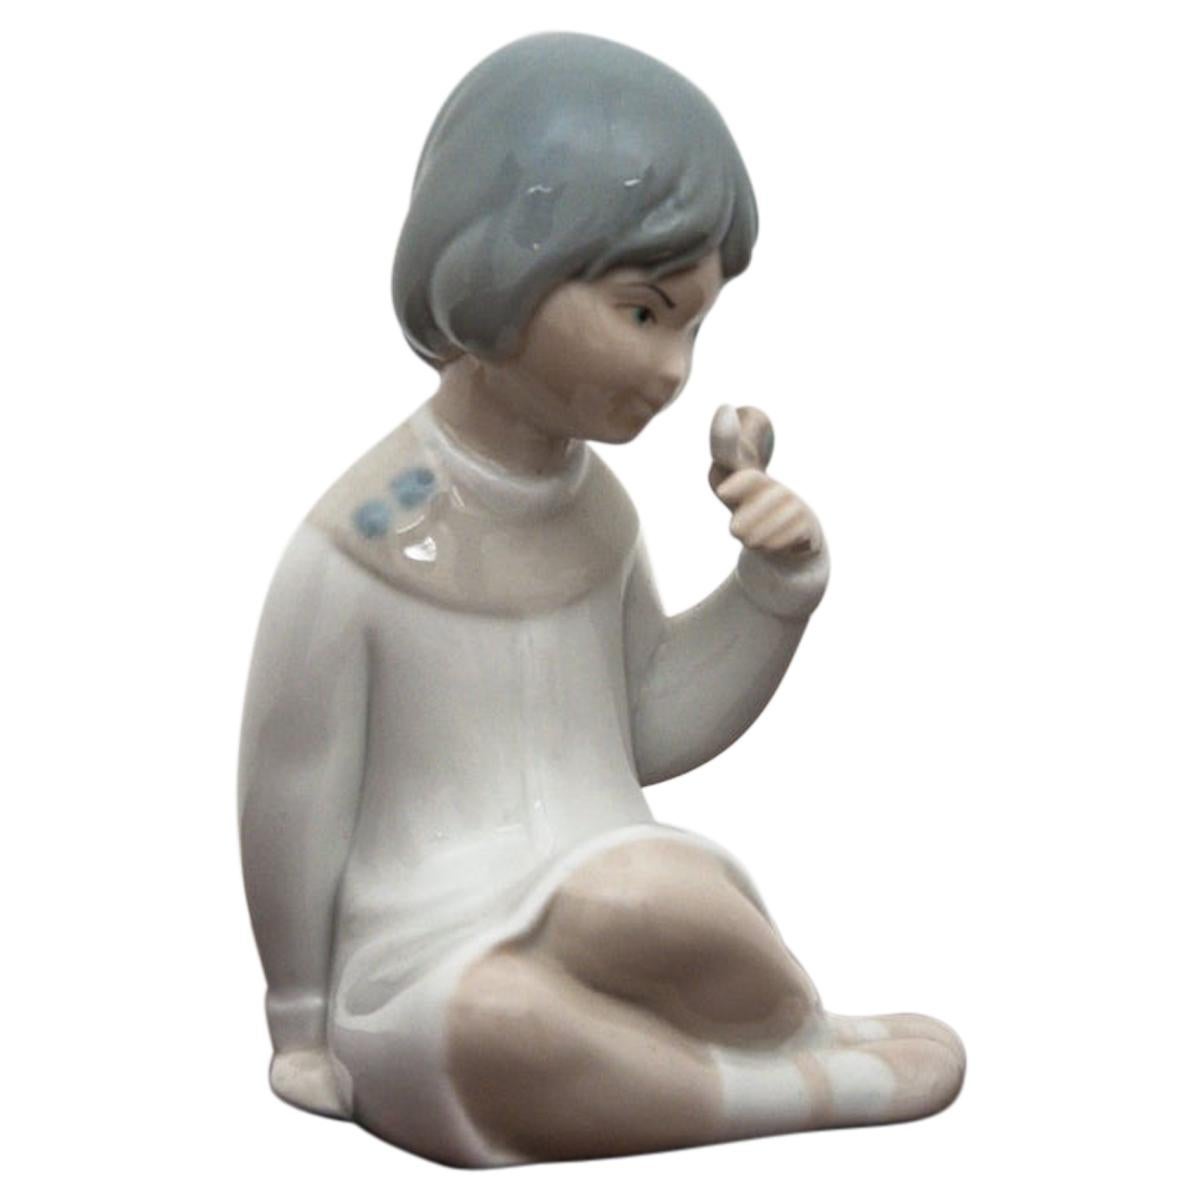 Girl Figurine from Miquel Requena, Spain, 1960